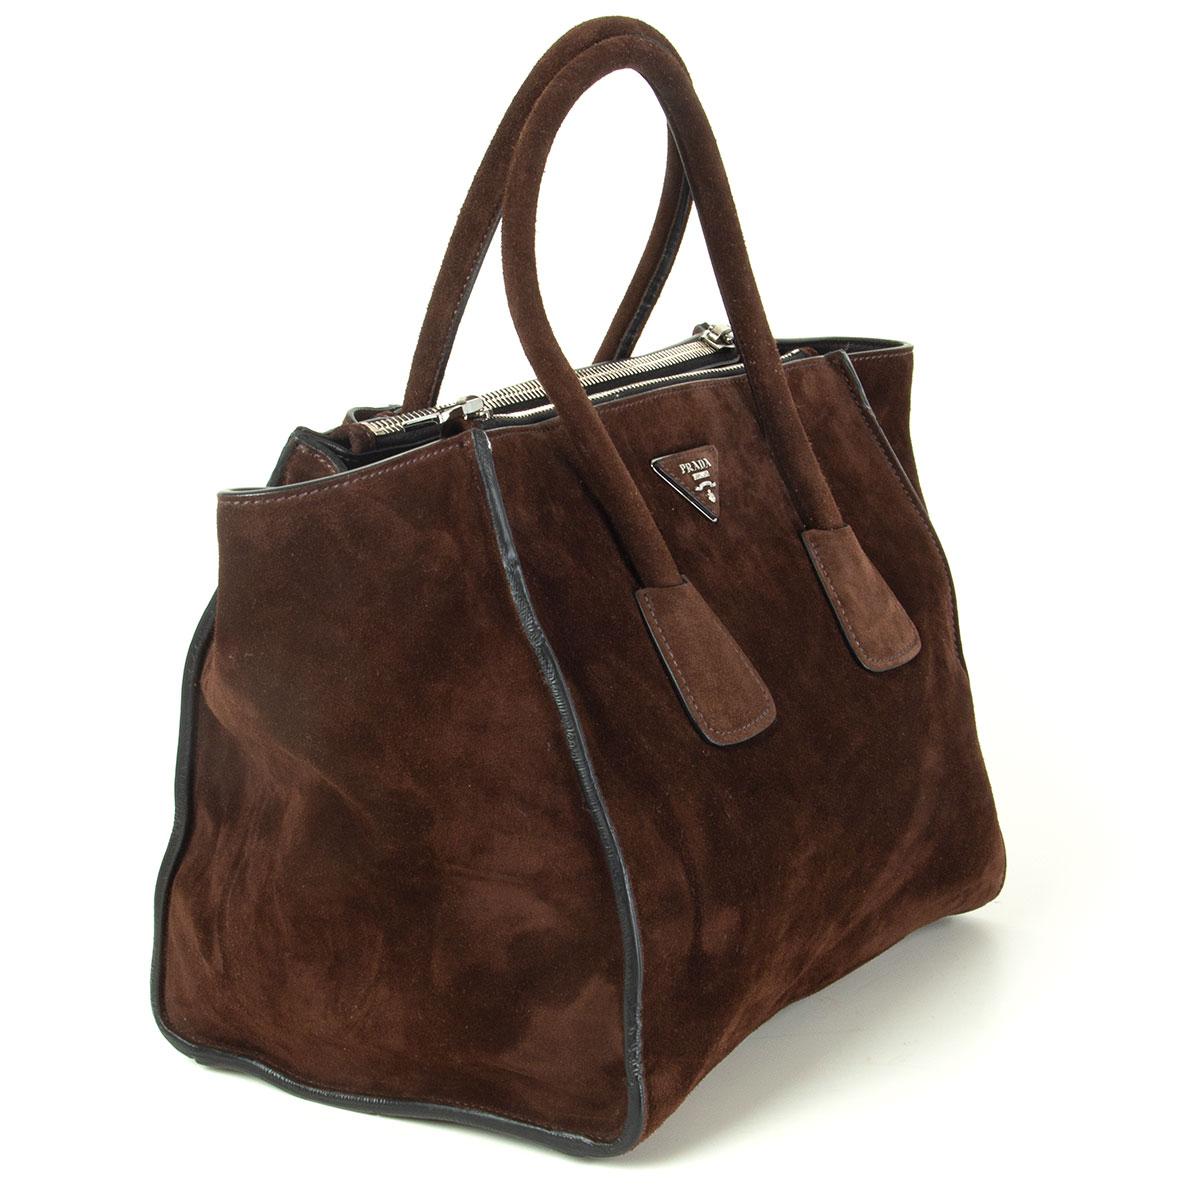 Prada 'Twin Pocket' tote in Mogano (dark brown) Scamosciato suede featuring silver-tone hardware. Opens with a push-button and is lined in smooth black lambskin with two extra large zip pockets on the side, a small zip pocket against the back and a